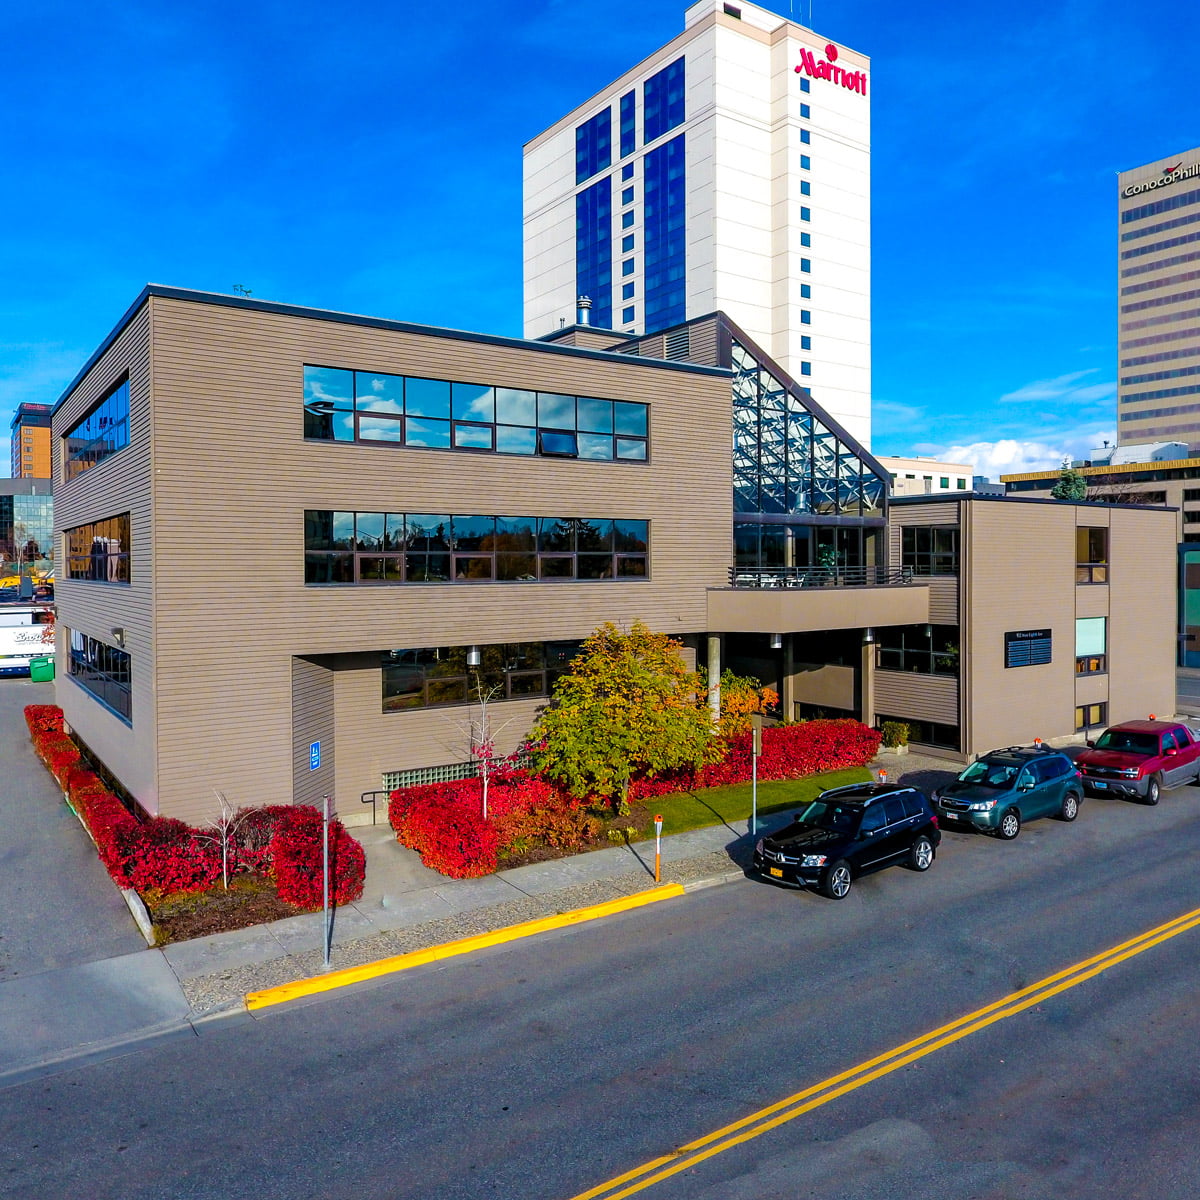 Exterior of RSD Properties' coworking space, Cowork by RSD, on a sunny Anchorage, Alaska day. Brown building with an atrium in the middle and red and green hedges around the left and front sides. Cars are parked on street in front, and the Marriot and Conoco Phillips building are in the background